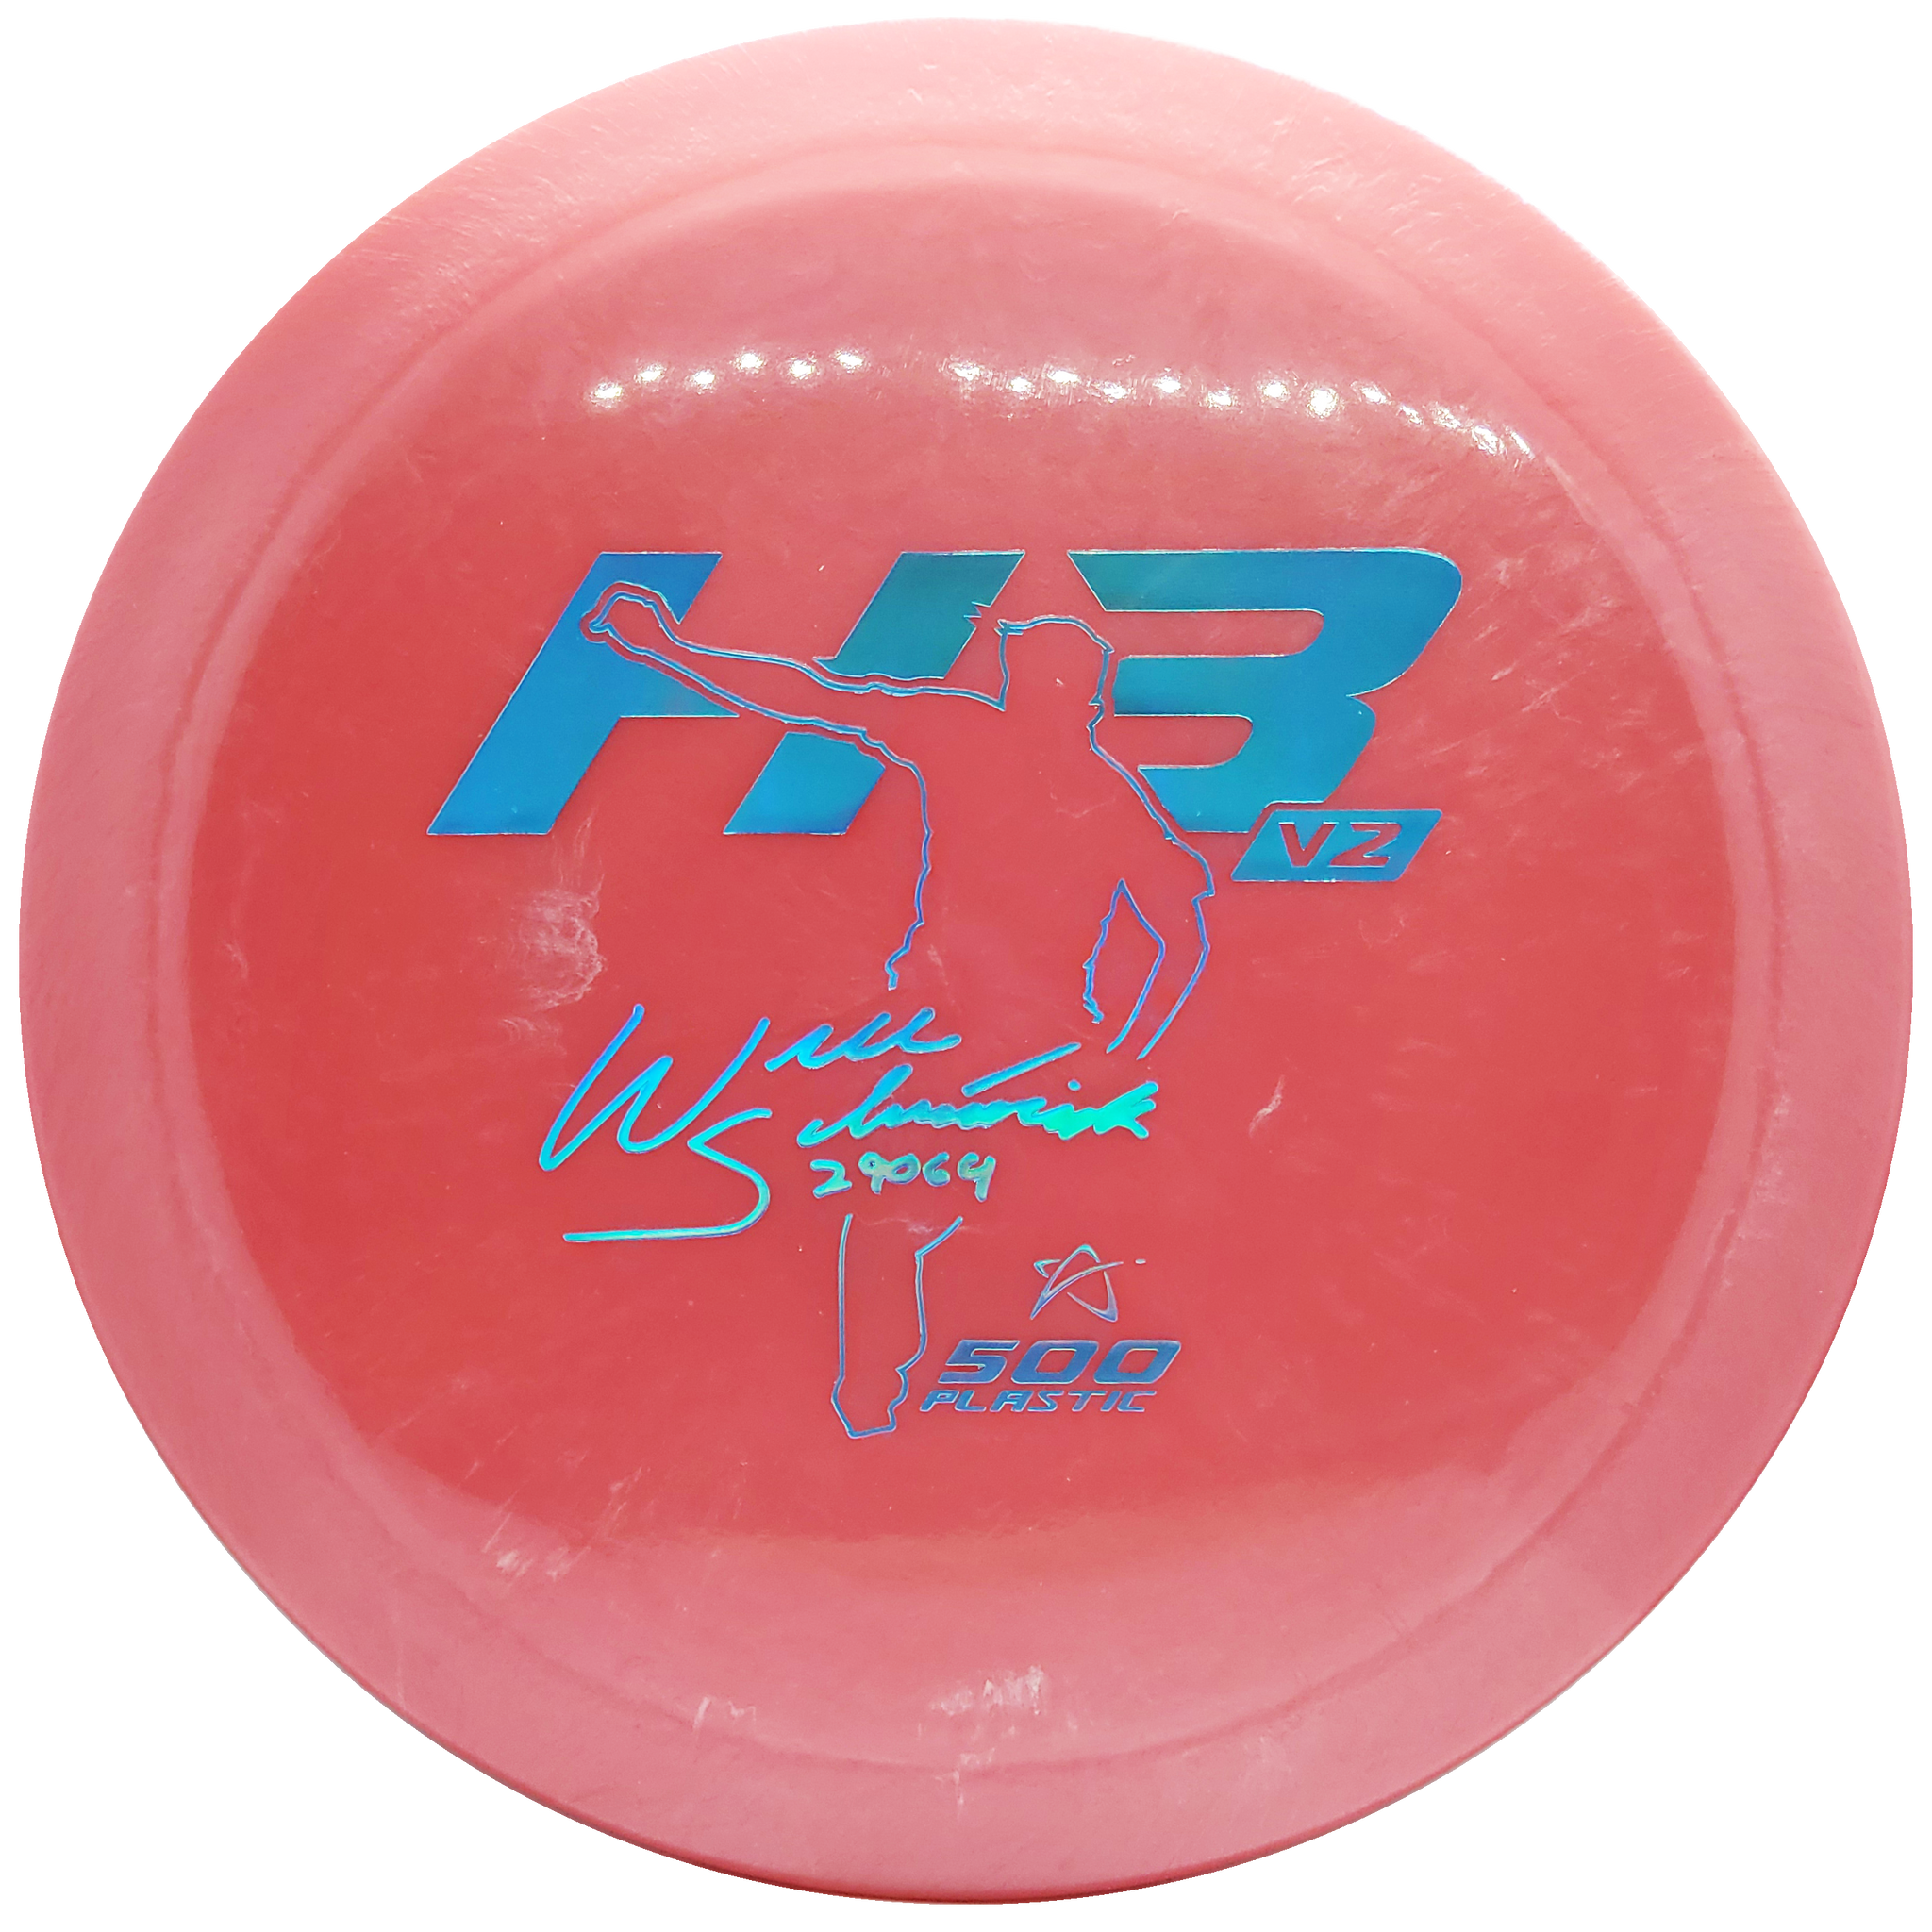 Prodigy: H3 V2 Hybrid Driver - Will Schusterick 2021 Signature Series - Pink/Blue